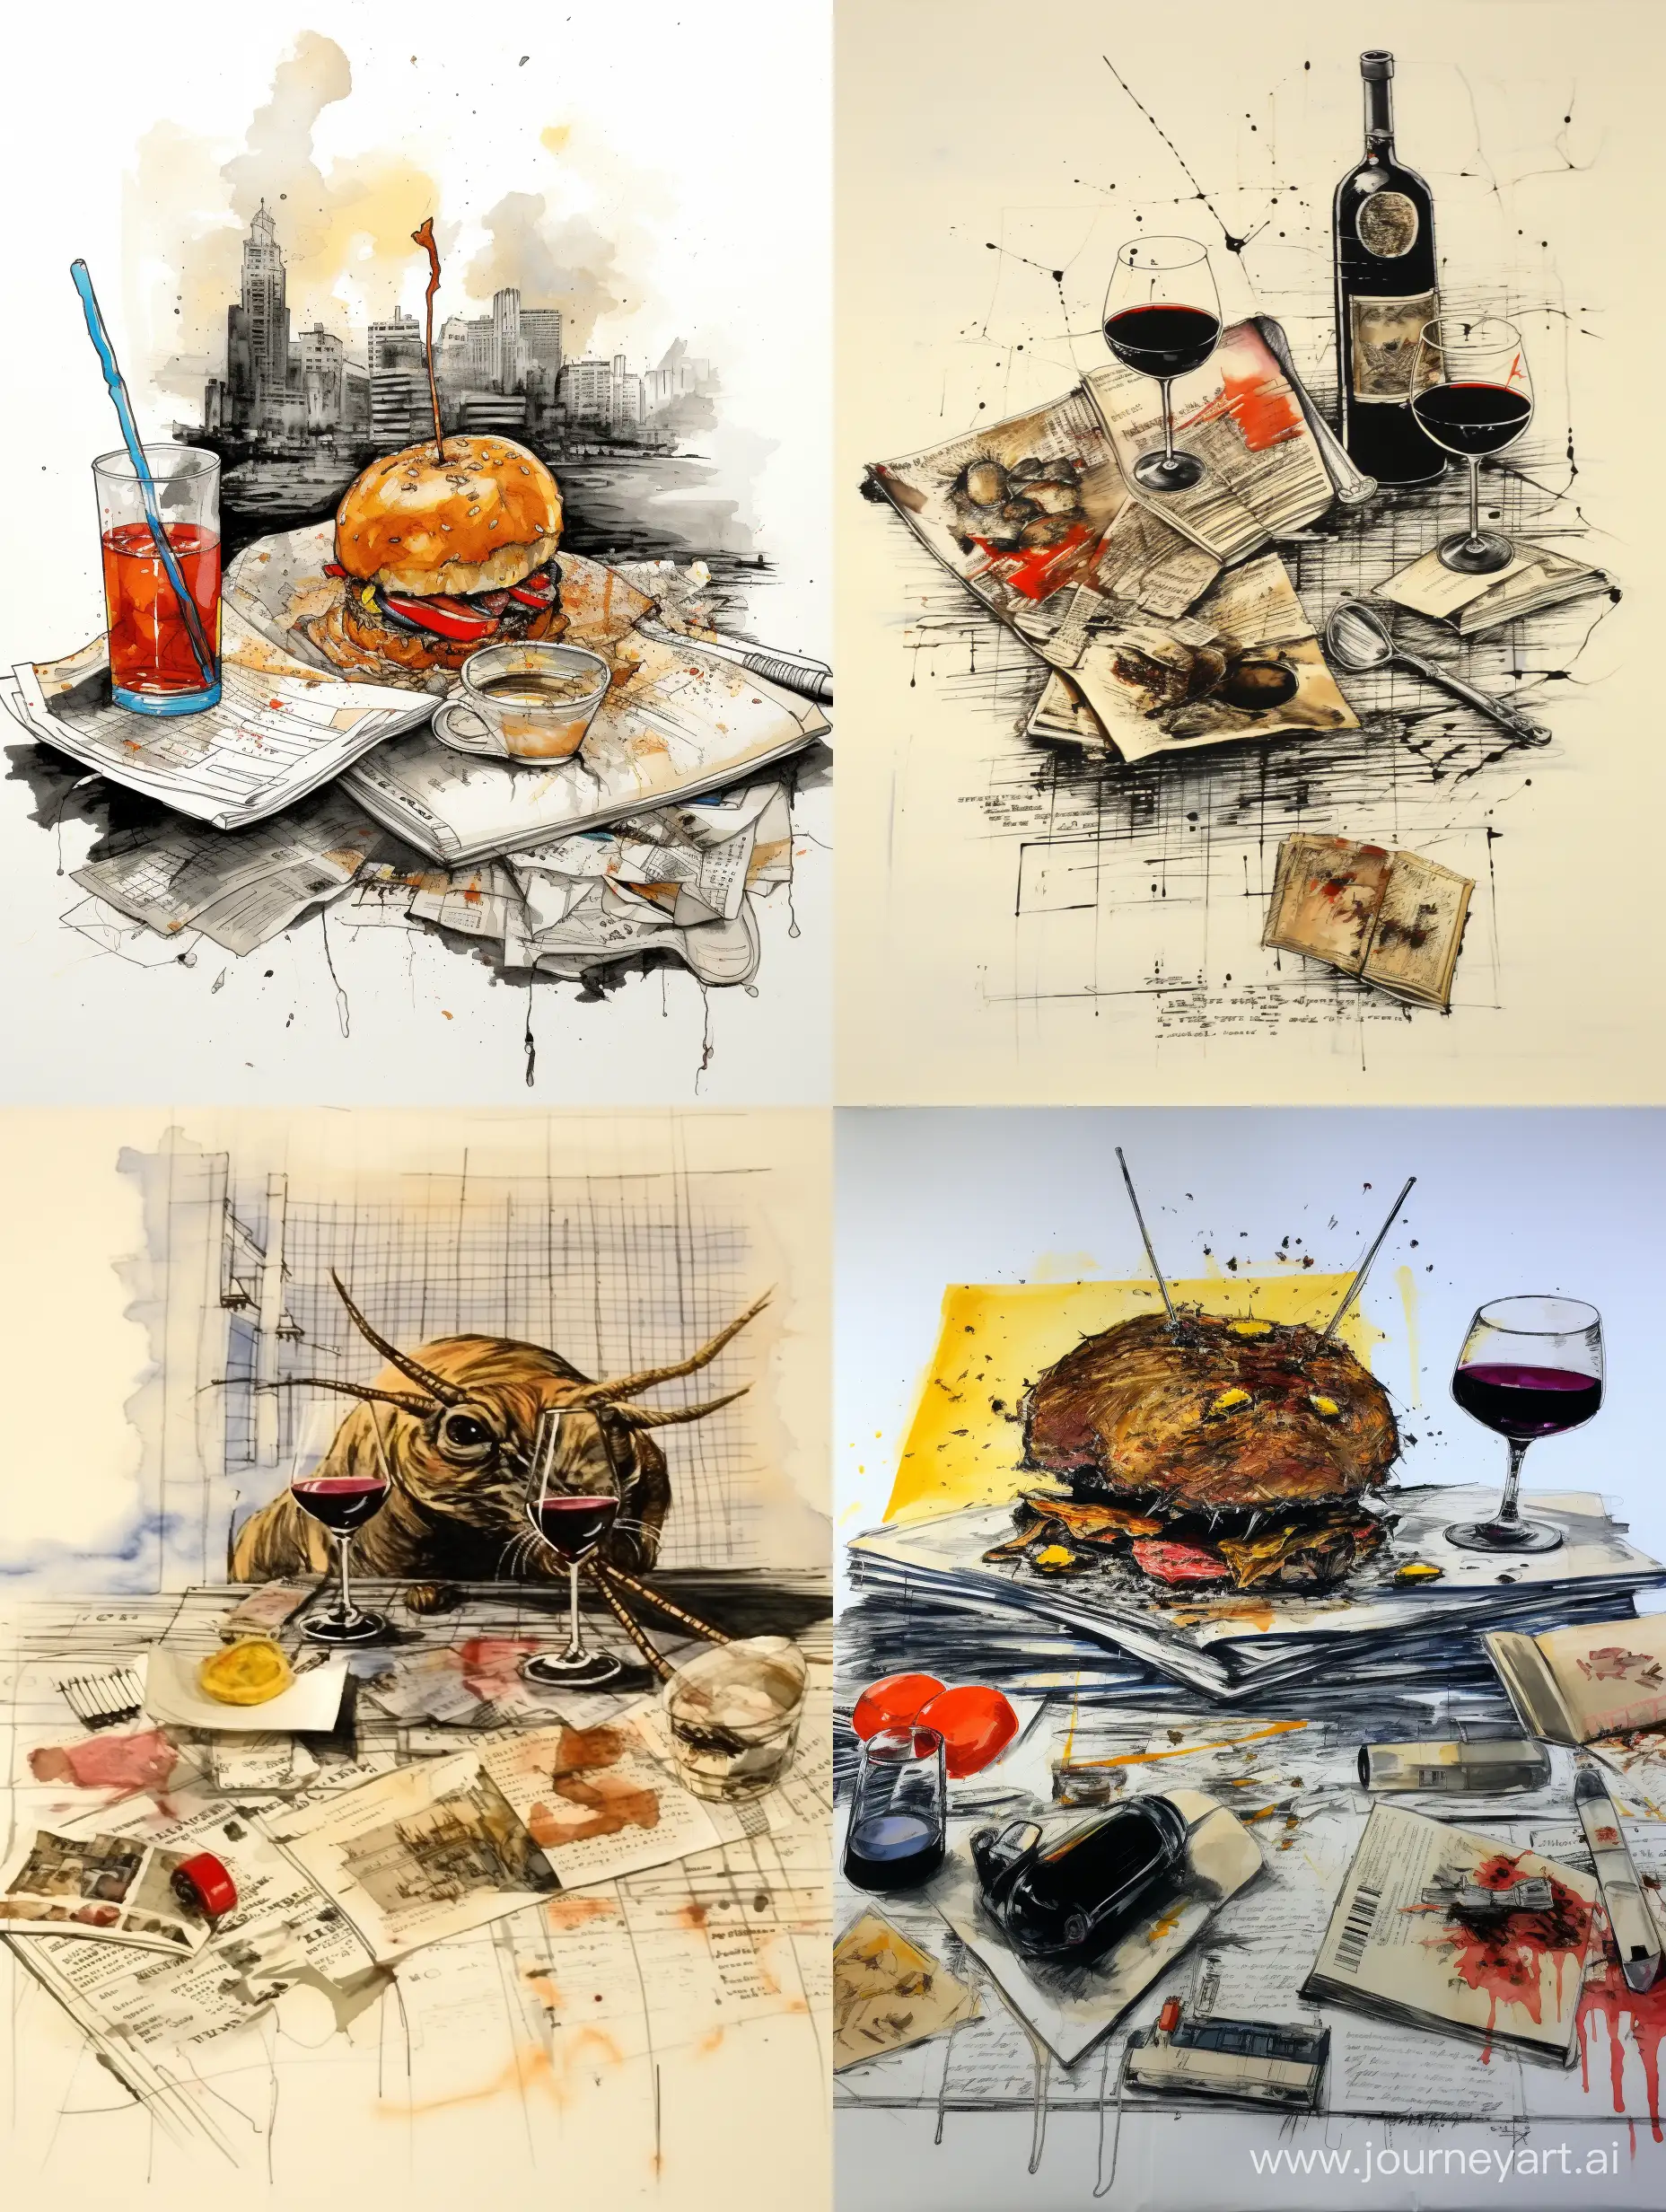 half of a burger, one whiskey tumbler, pages of a manuscript, cigarettes, ashes, mustard spilled, ketchup smeared, potato fries:: on a side, view from above, no background, Ralph Steadman's style in ink, erratic, --no faces,